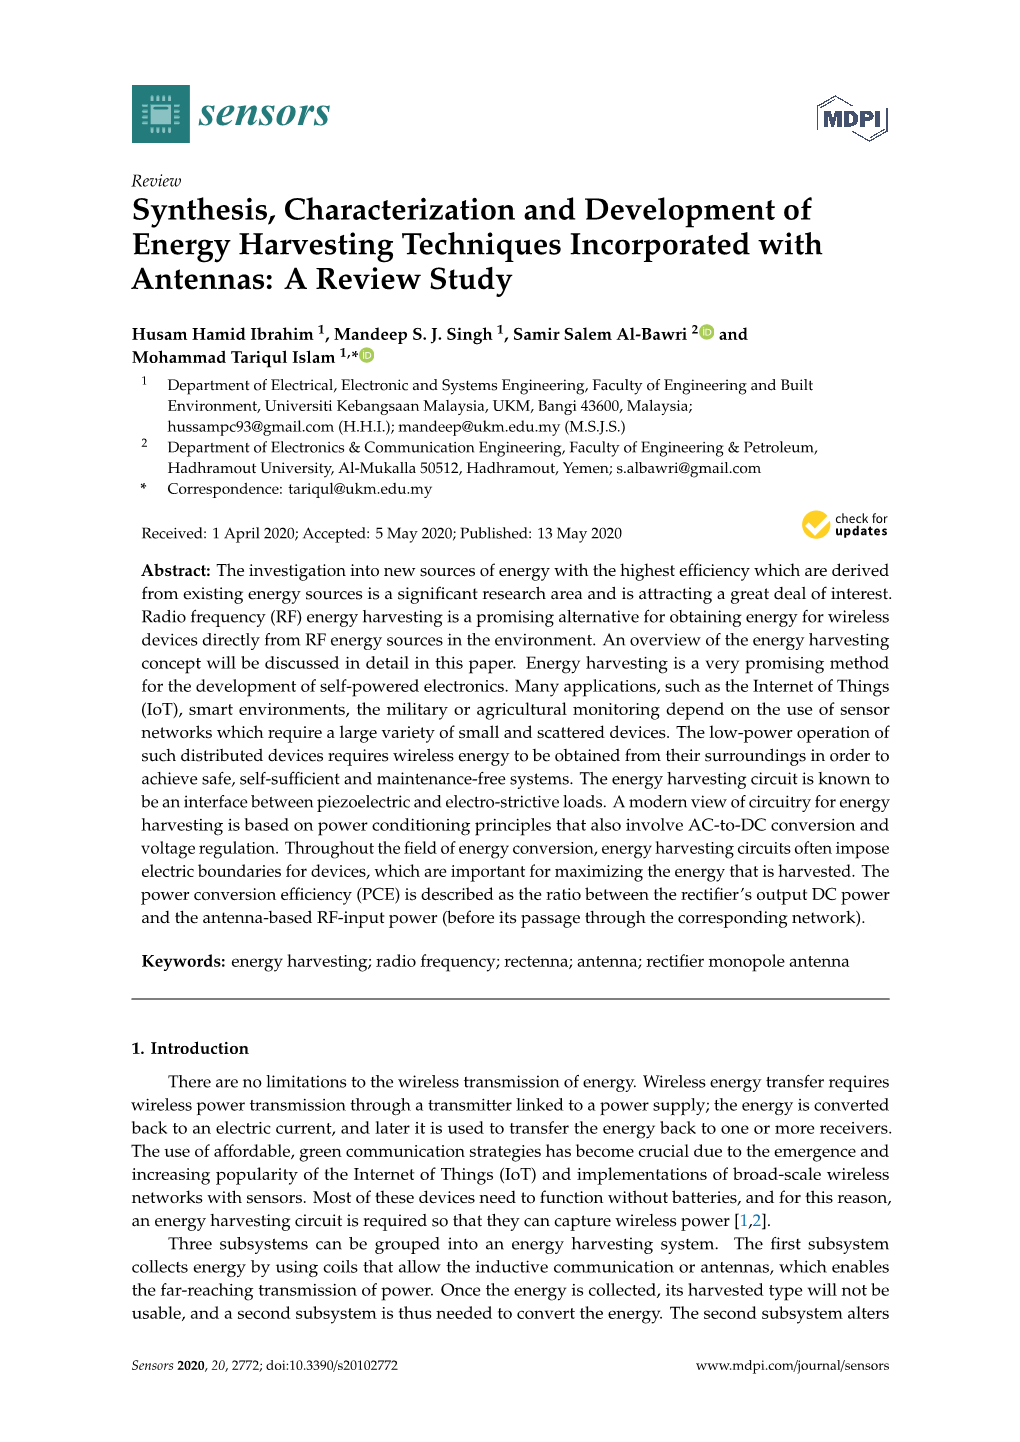 Synthesis, Characterization and Development of Energy Harvesting Techniques Incorporated with Antennas: a Review Study